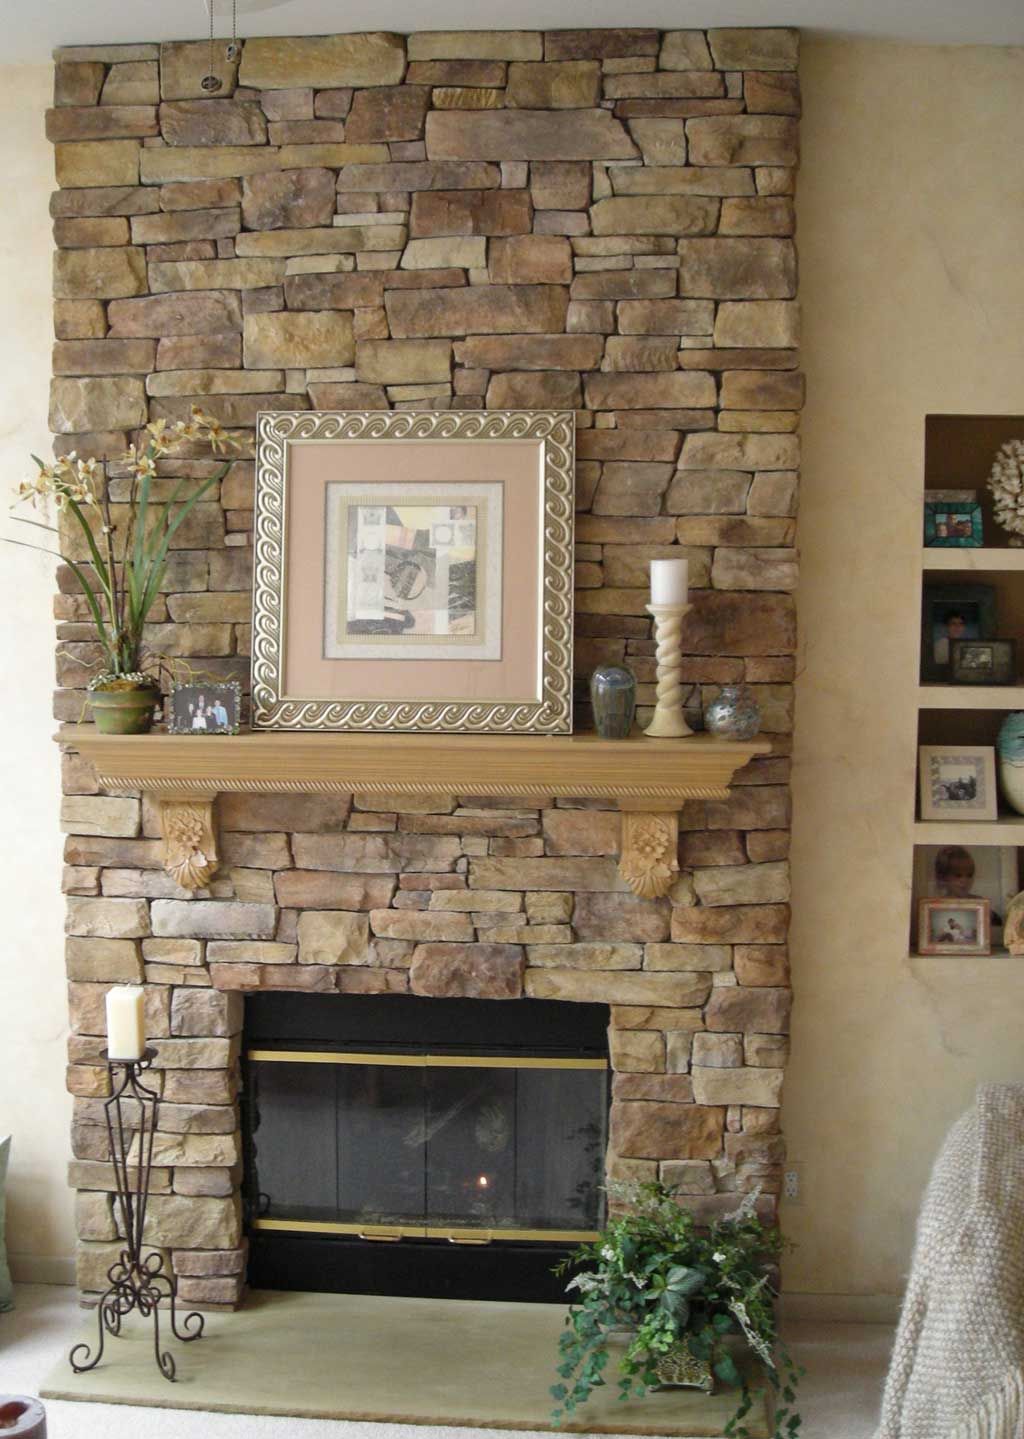 Fake Brick Fireplace Unique Stone Veneer Fireplace Design Fireplace In 2019